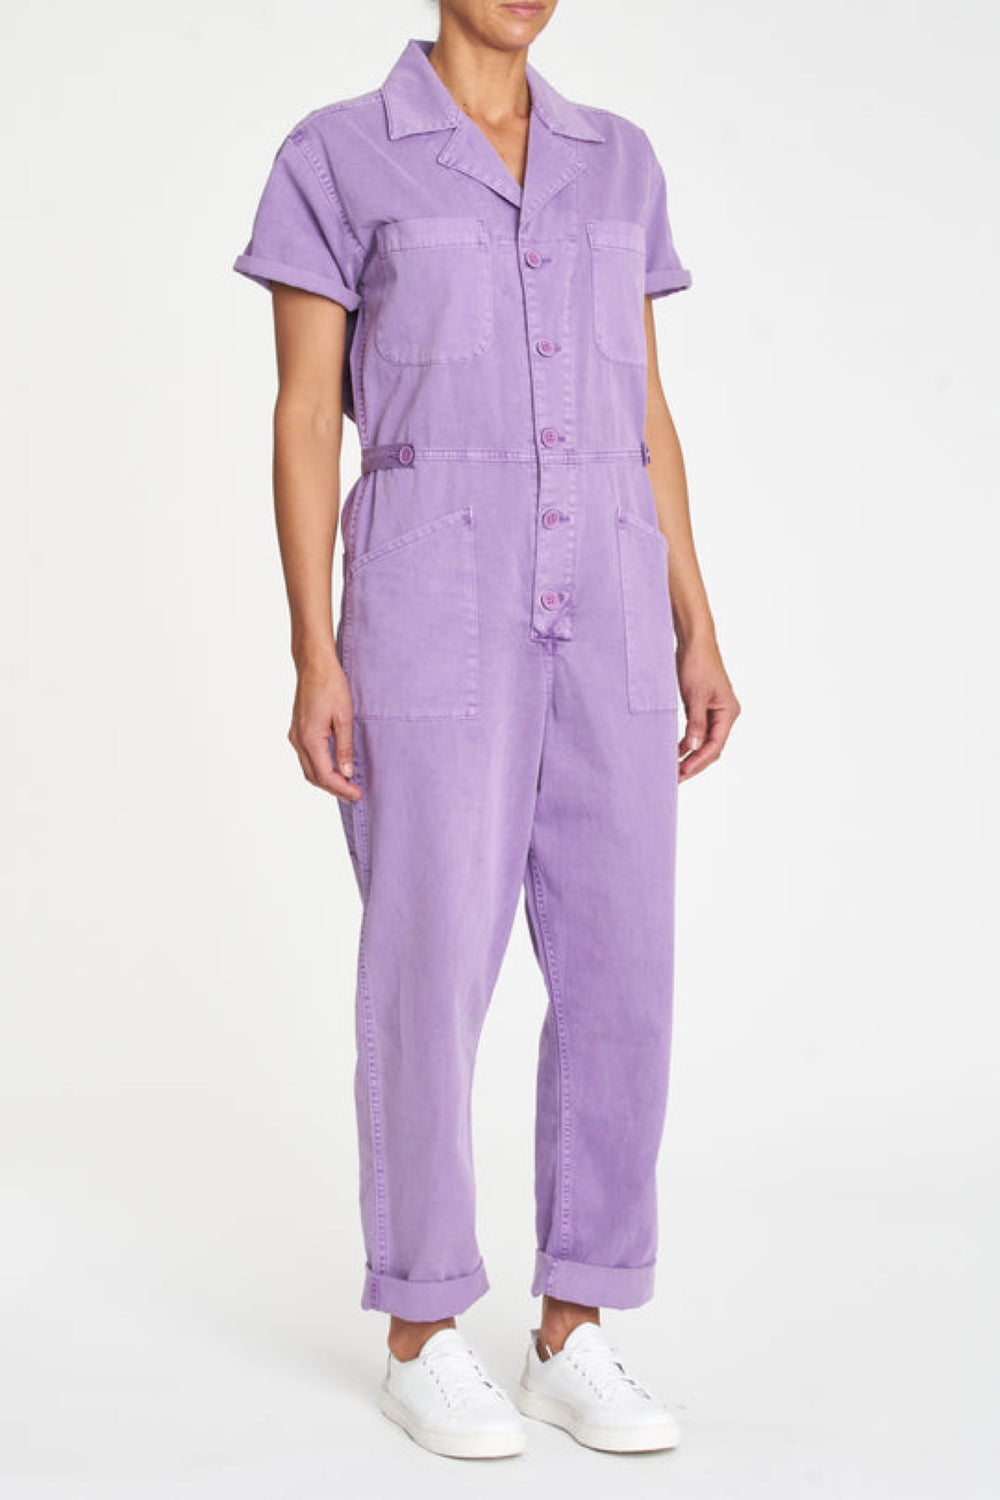 Orchid Grover Field Suit